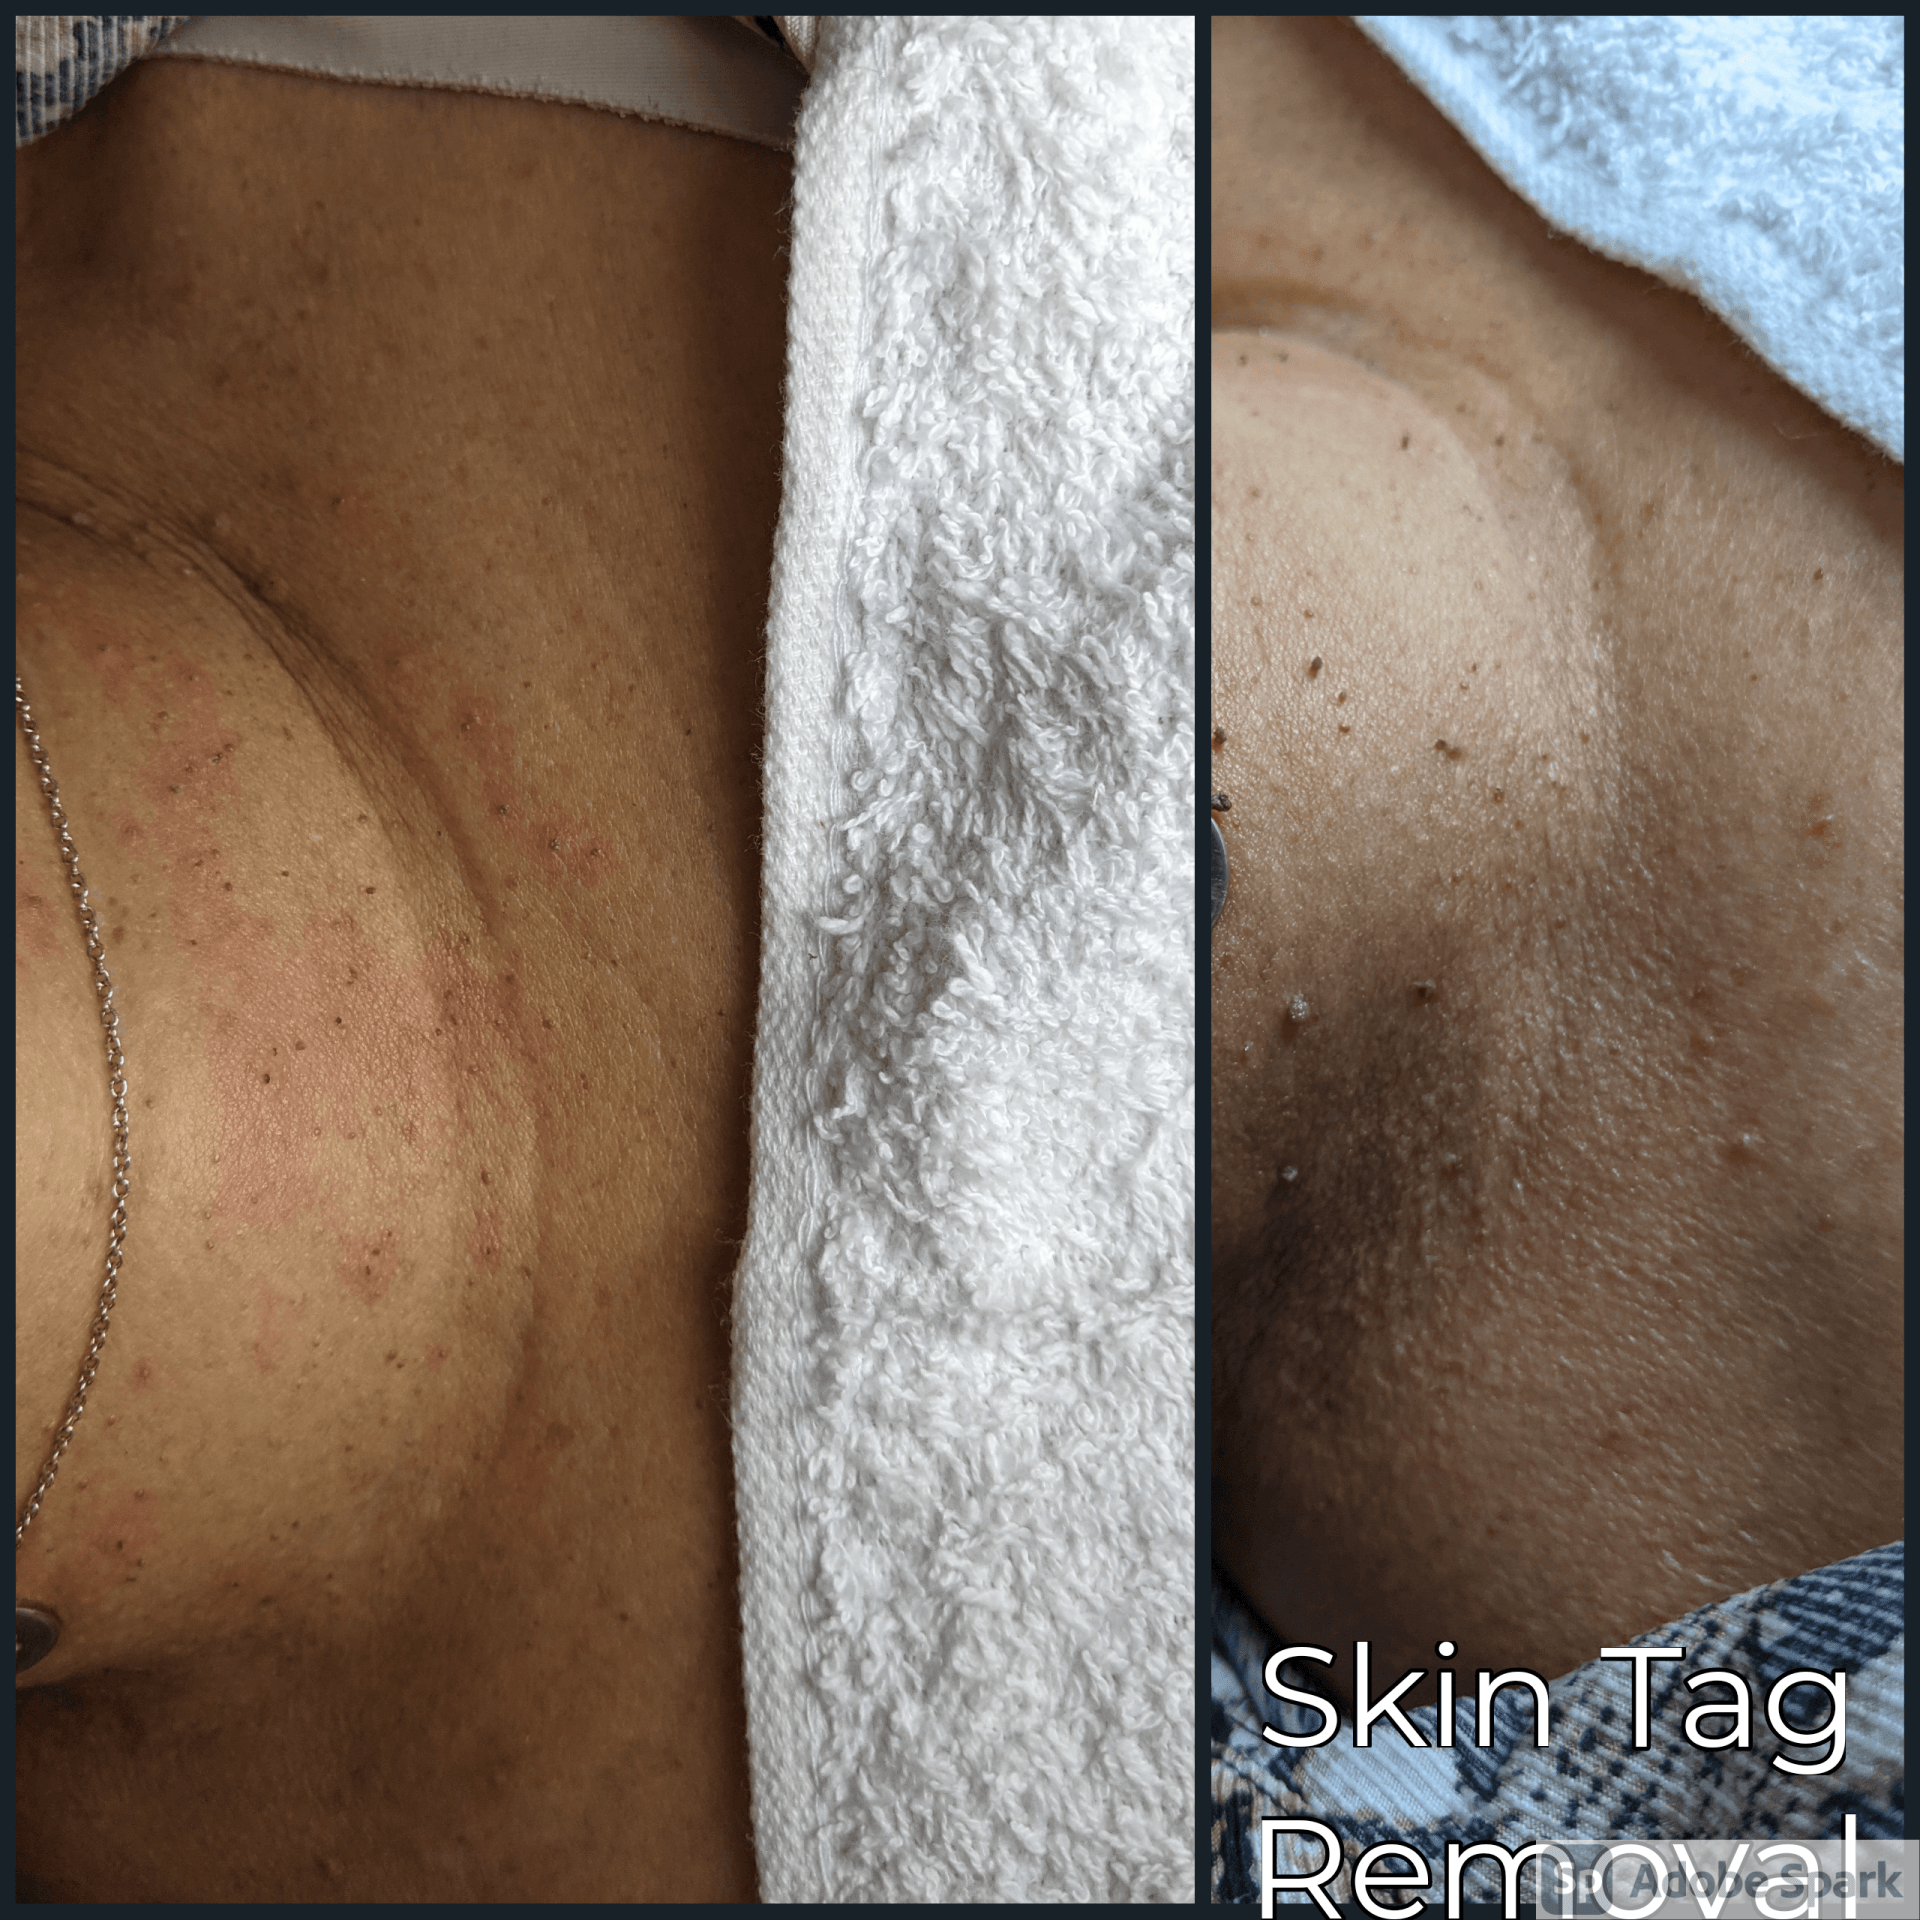 Skin Tag Removal -Before & After Pic